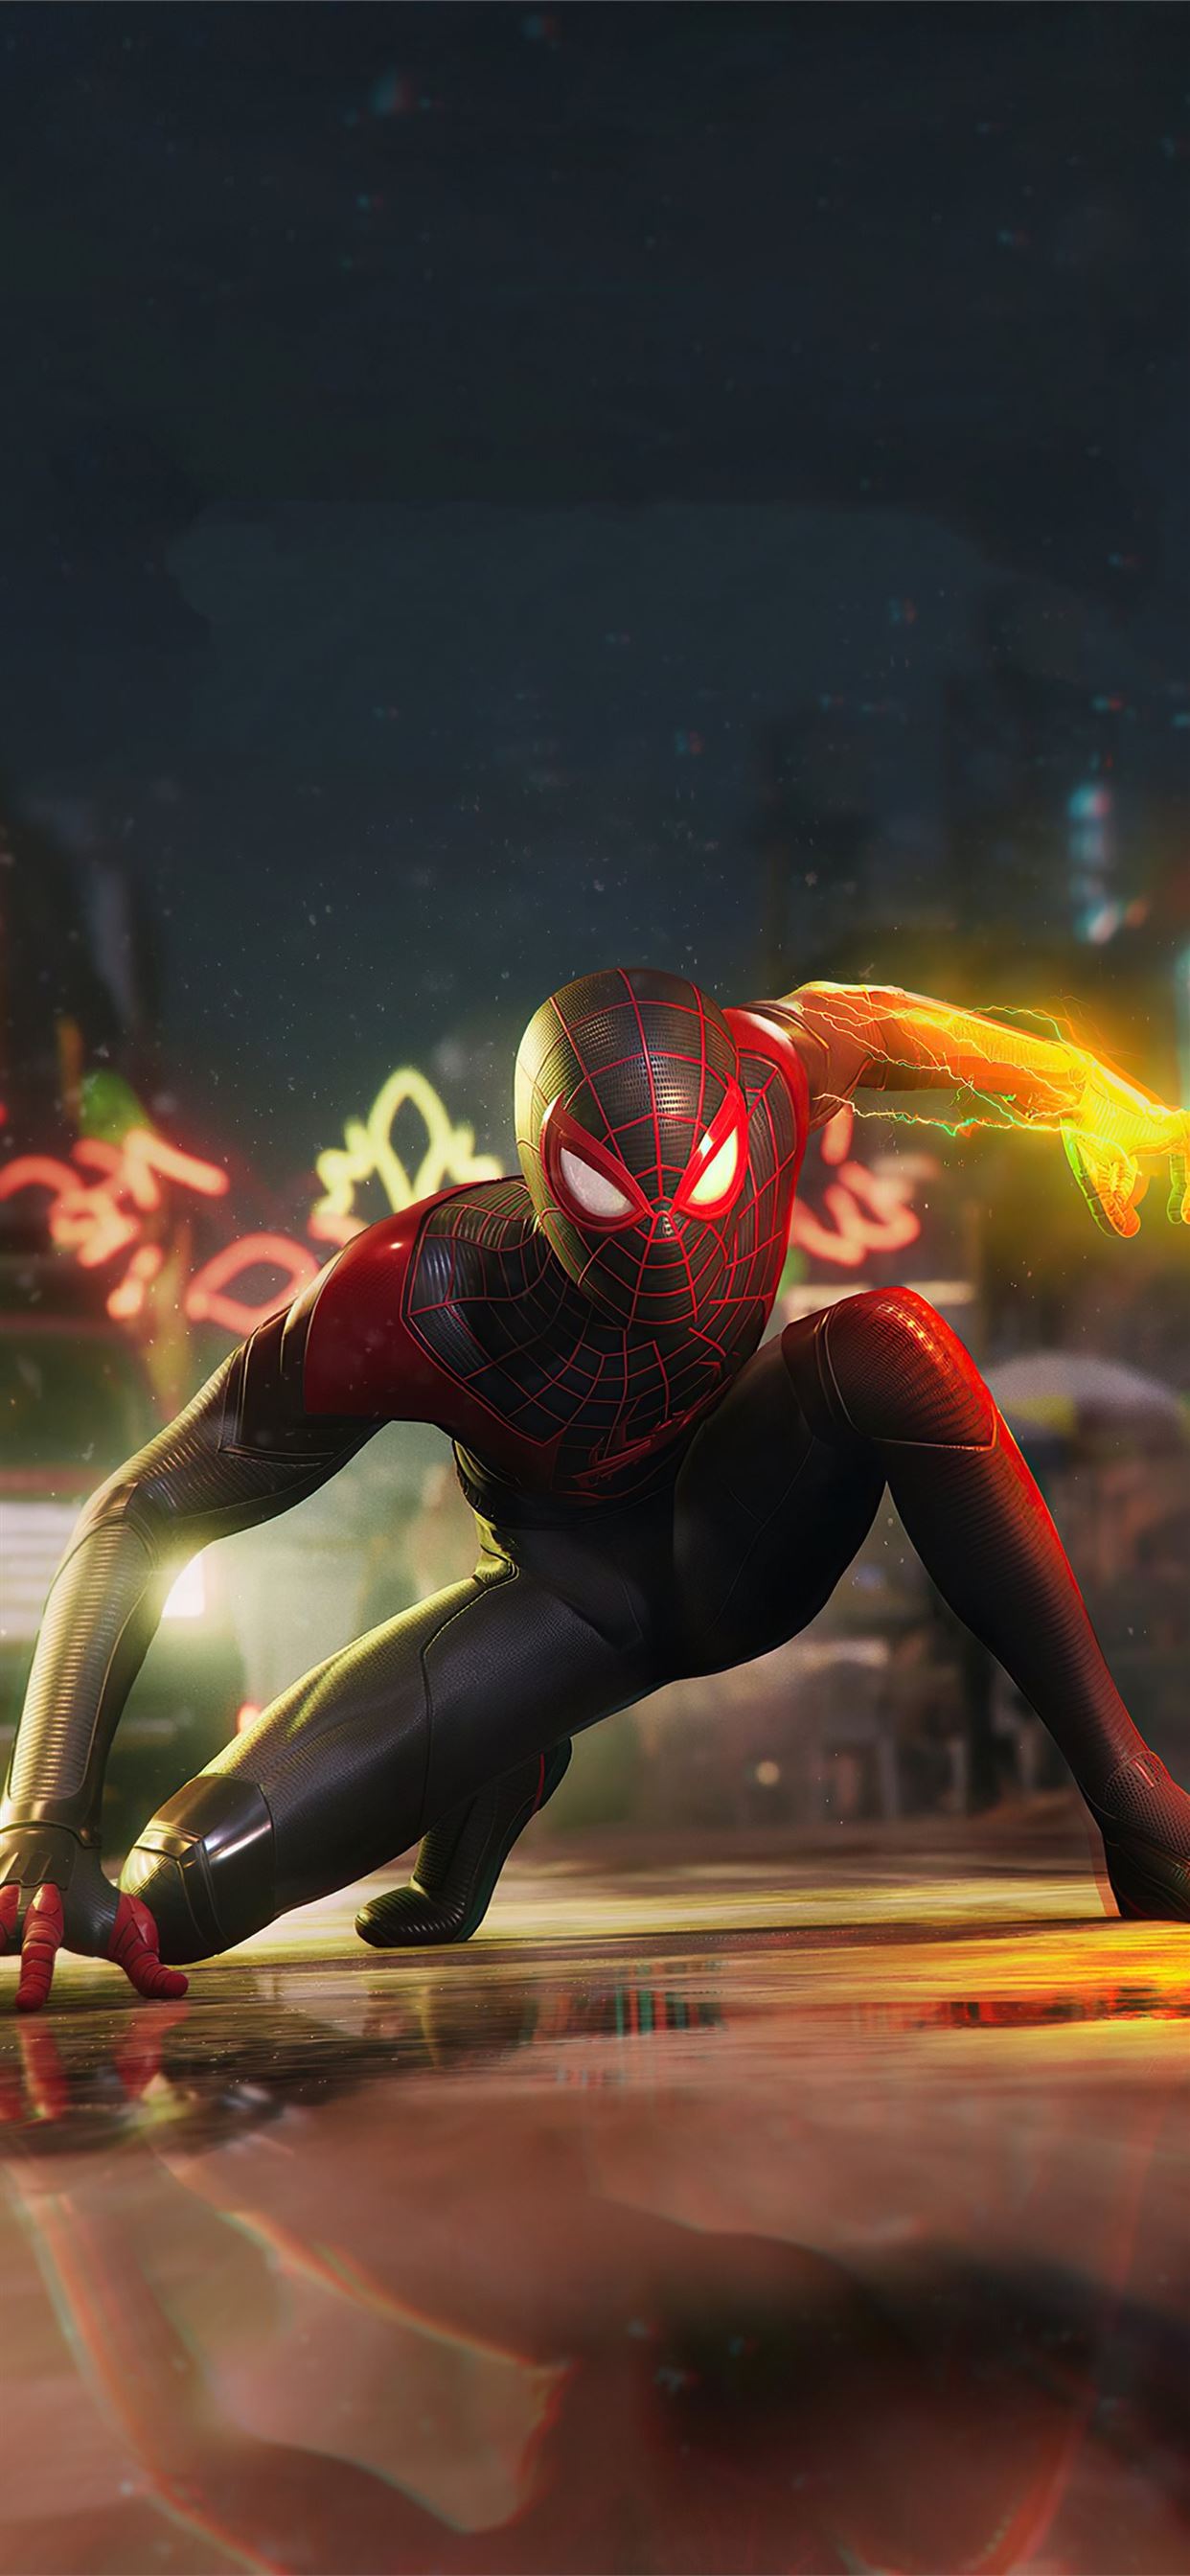 Spider Man Miles Morales Costume  IPhone Wallpapers  iPhone Wallpapers